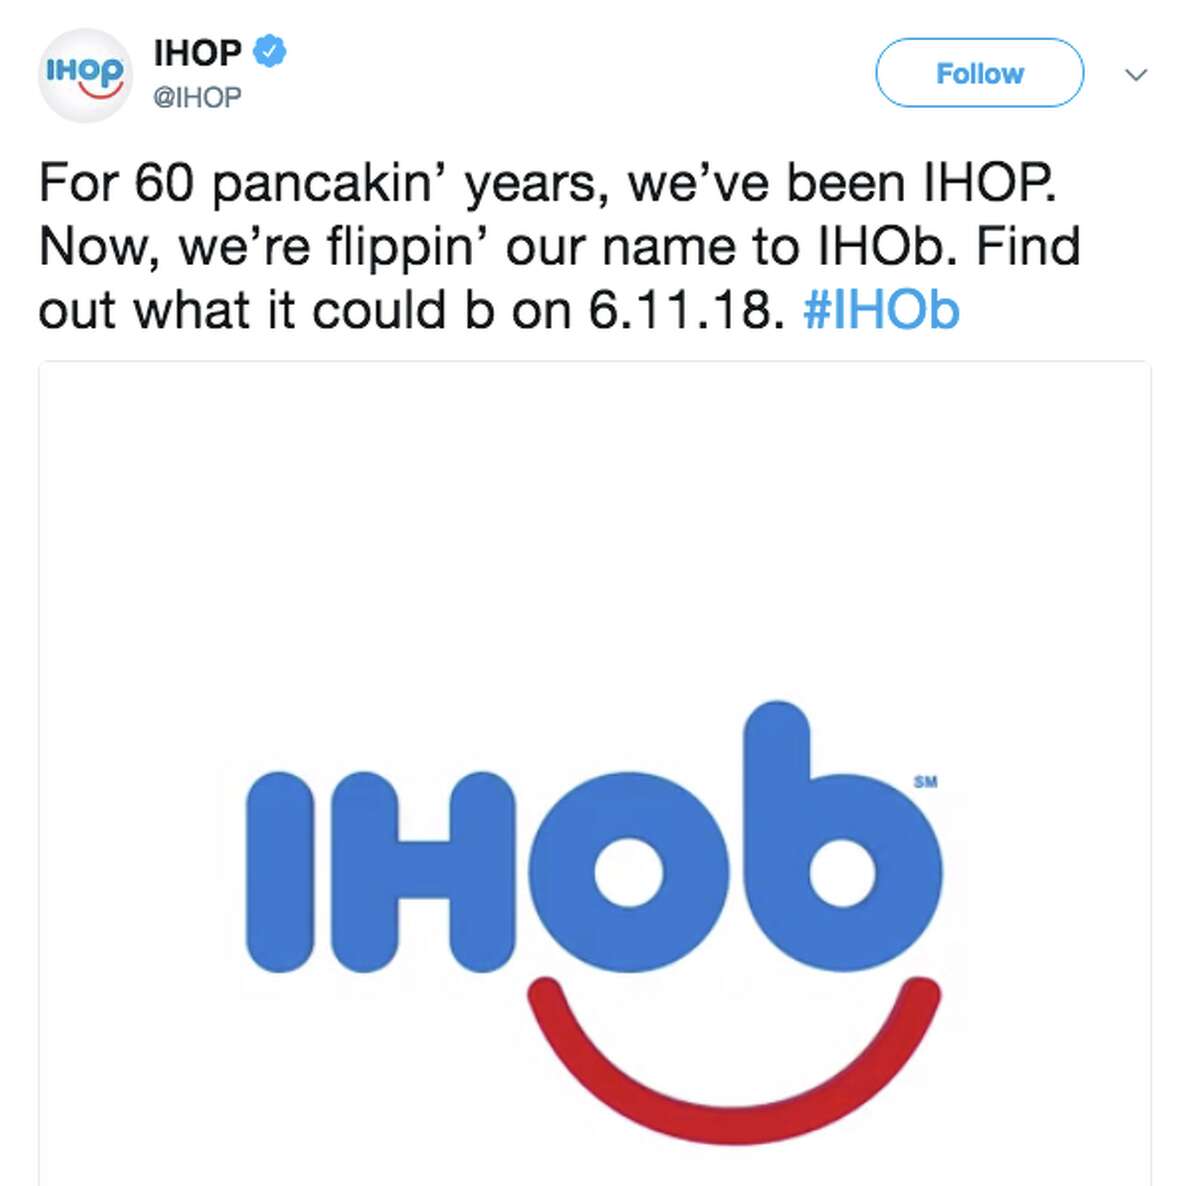 ihop announces name change to ihob but viewers have to wait to find out what the B stands for